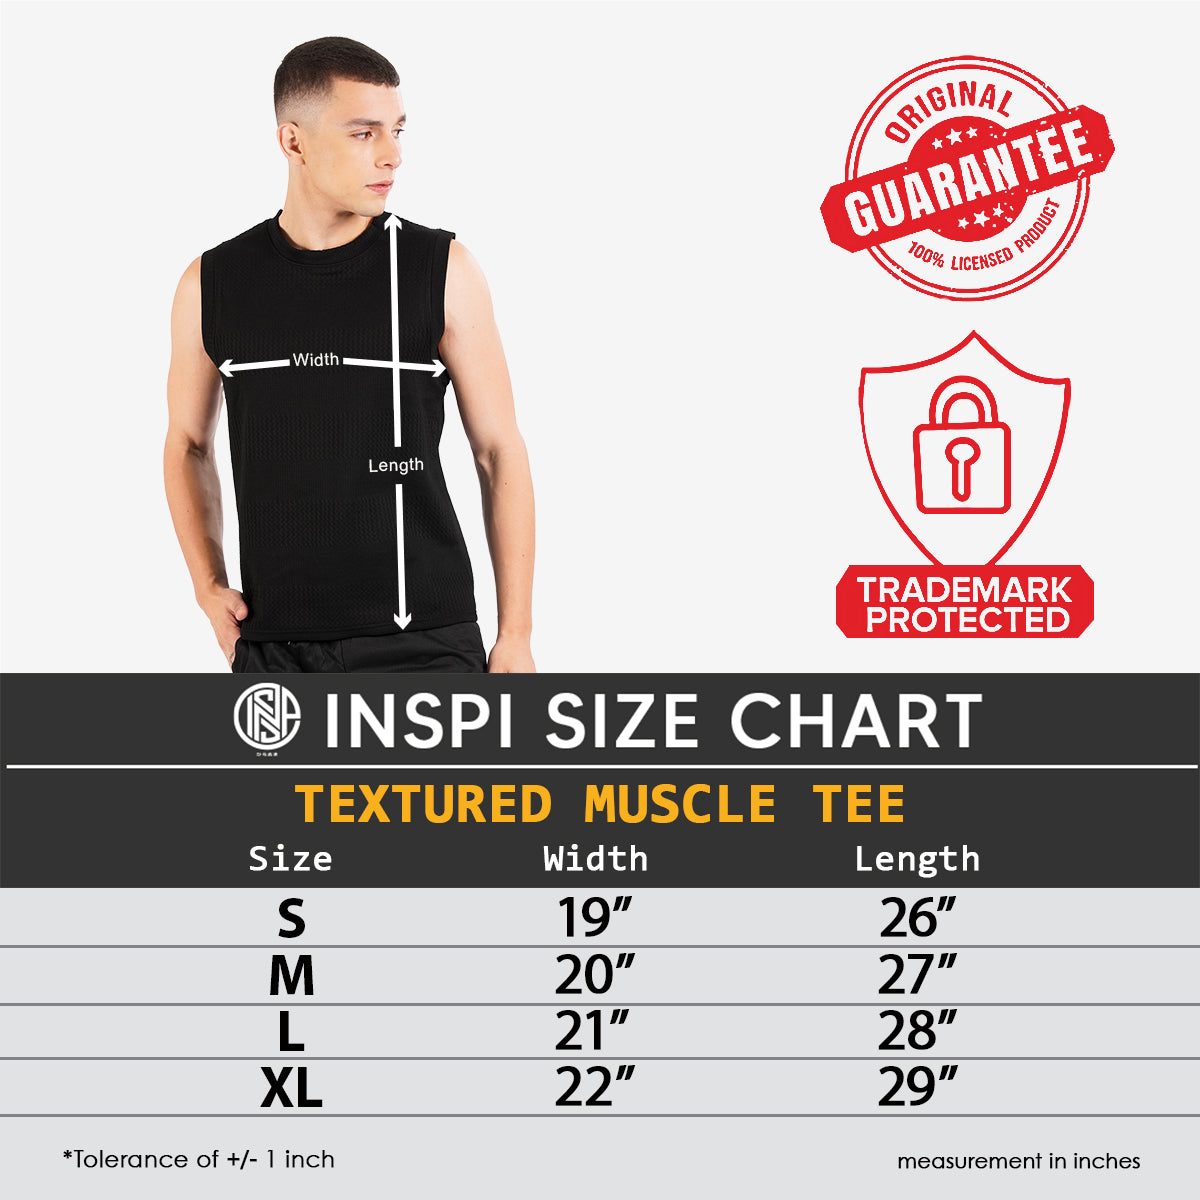 INSPI Textured Muscle Tee Collection For Men Sleeveless Stripe Black Tank Top Sando For Women Gym Workout Clothes Exercise Outfit